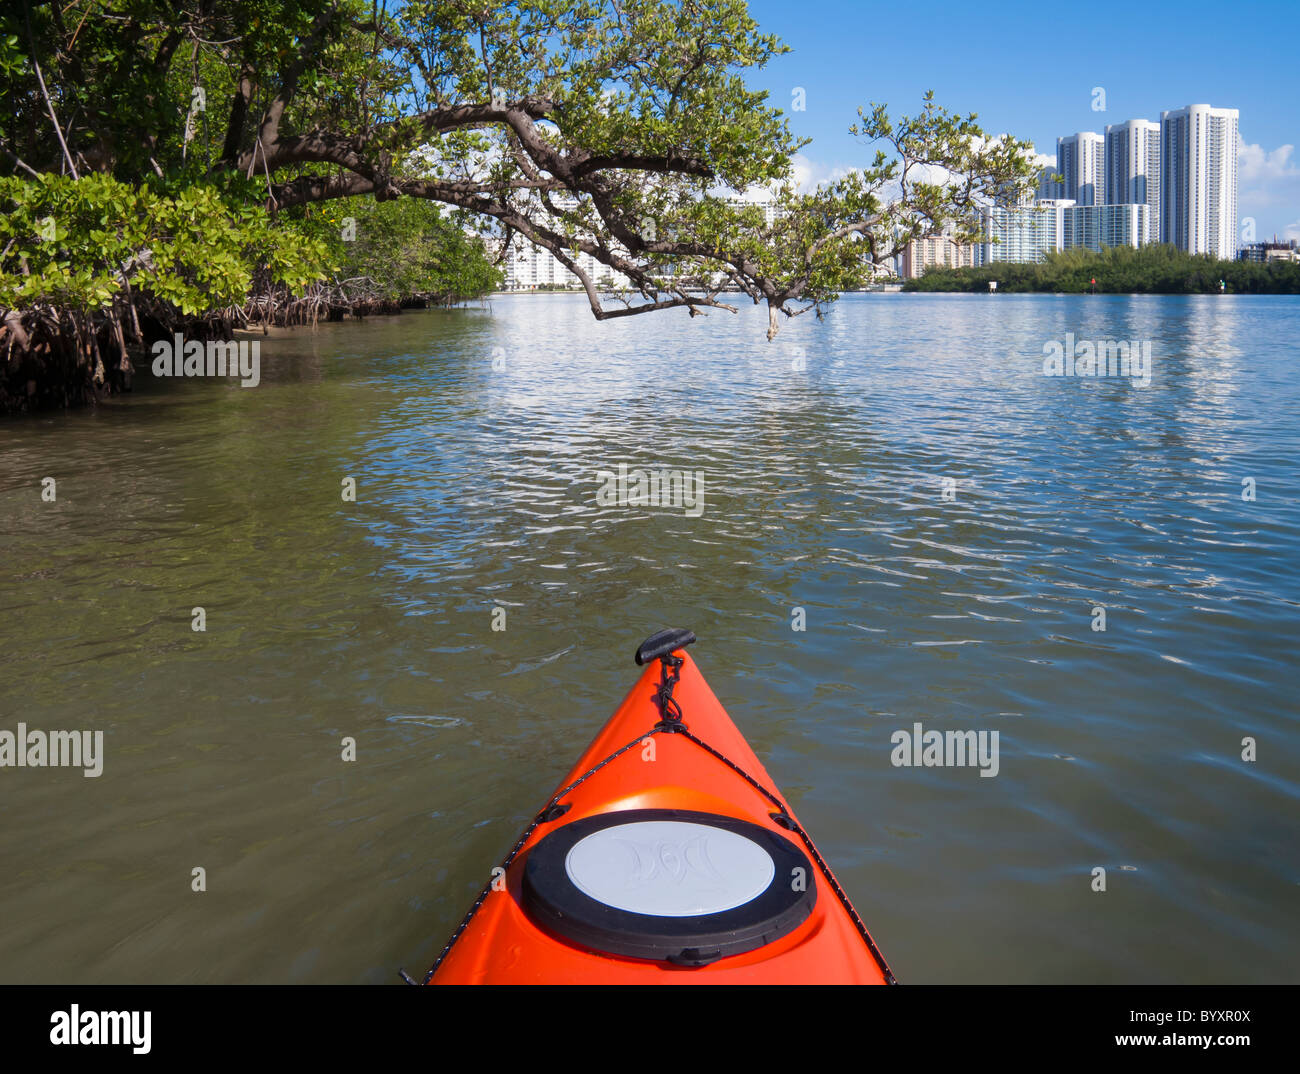 Condo high rises peek over mangrove forest along Northern end of Biscayne Bay, Oleta River State Park, Miami, FL Stock Photo